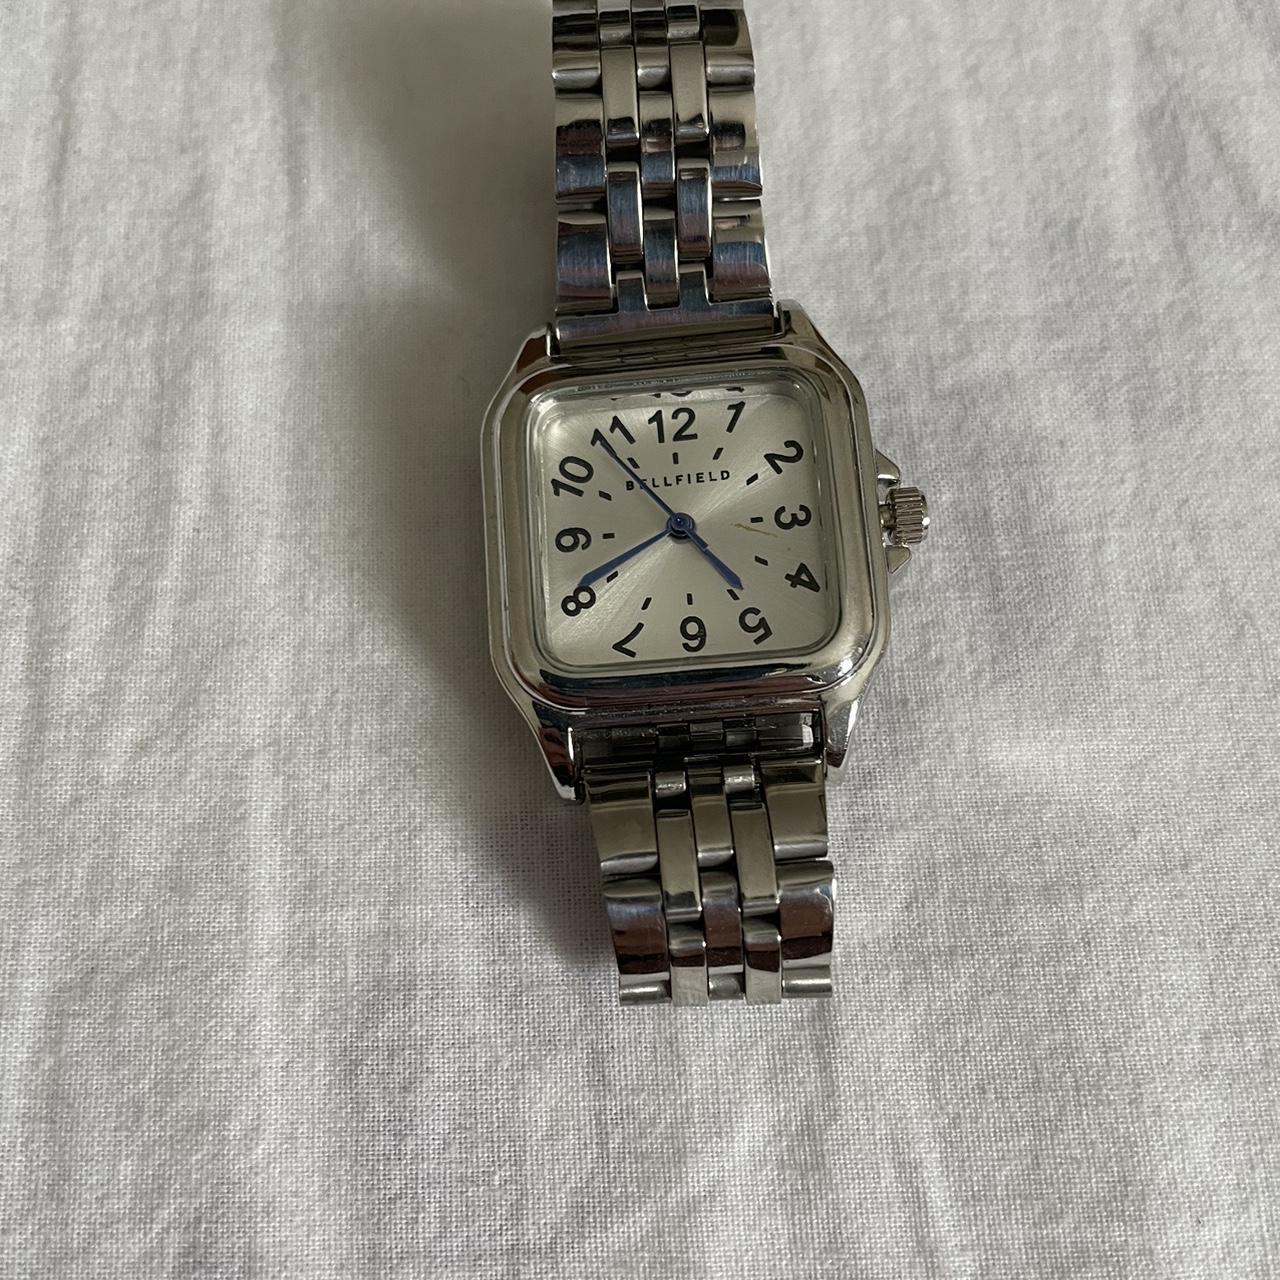 bellfield watch only worn once grea condition - Depop